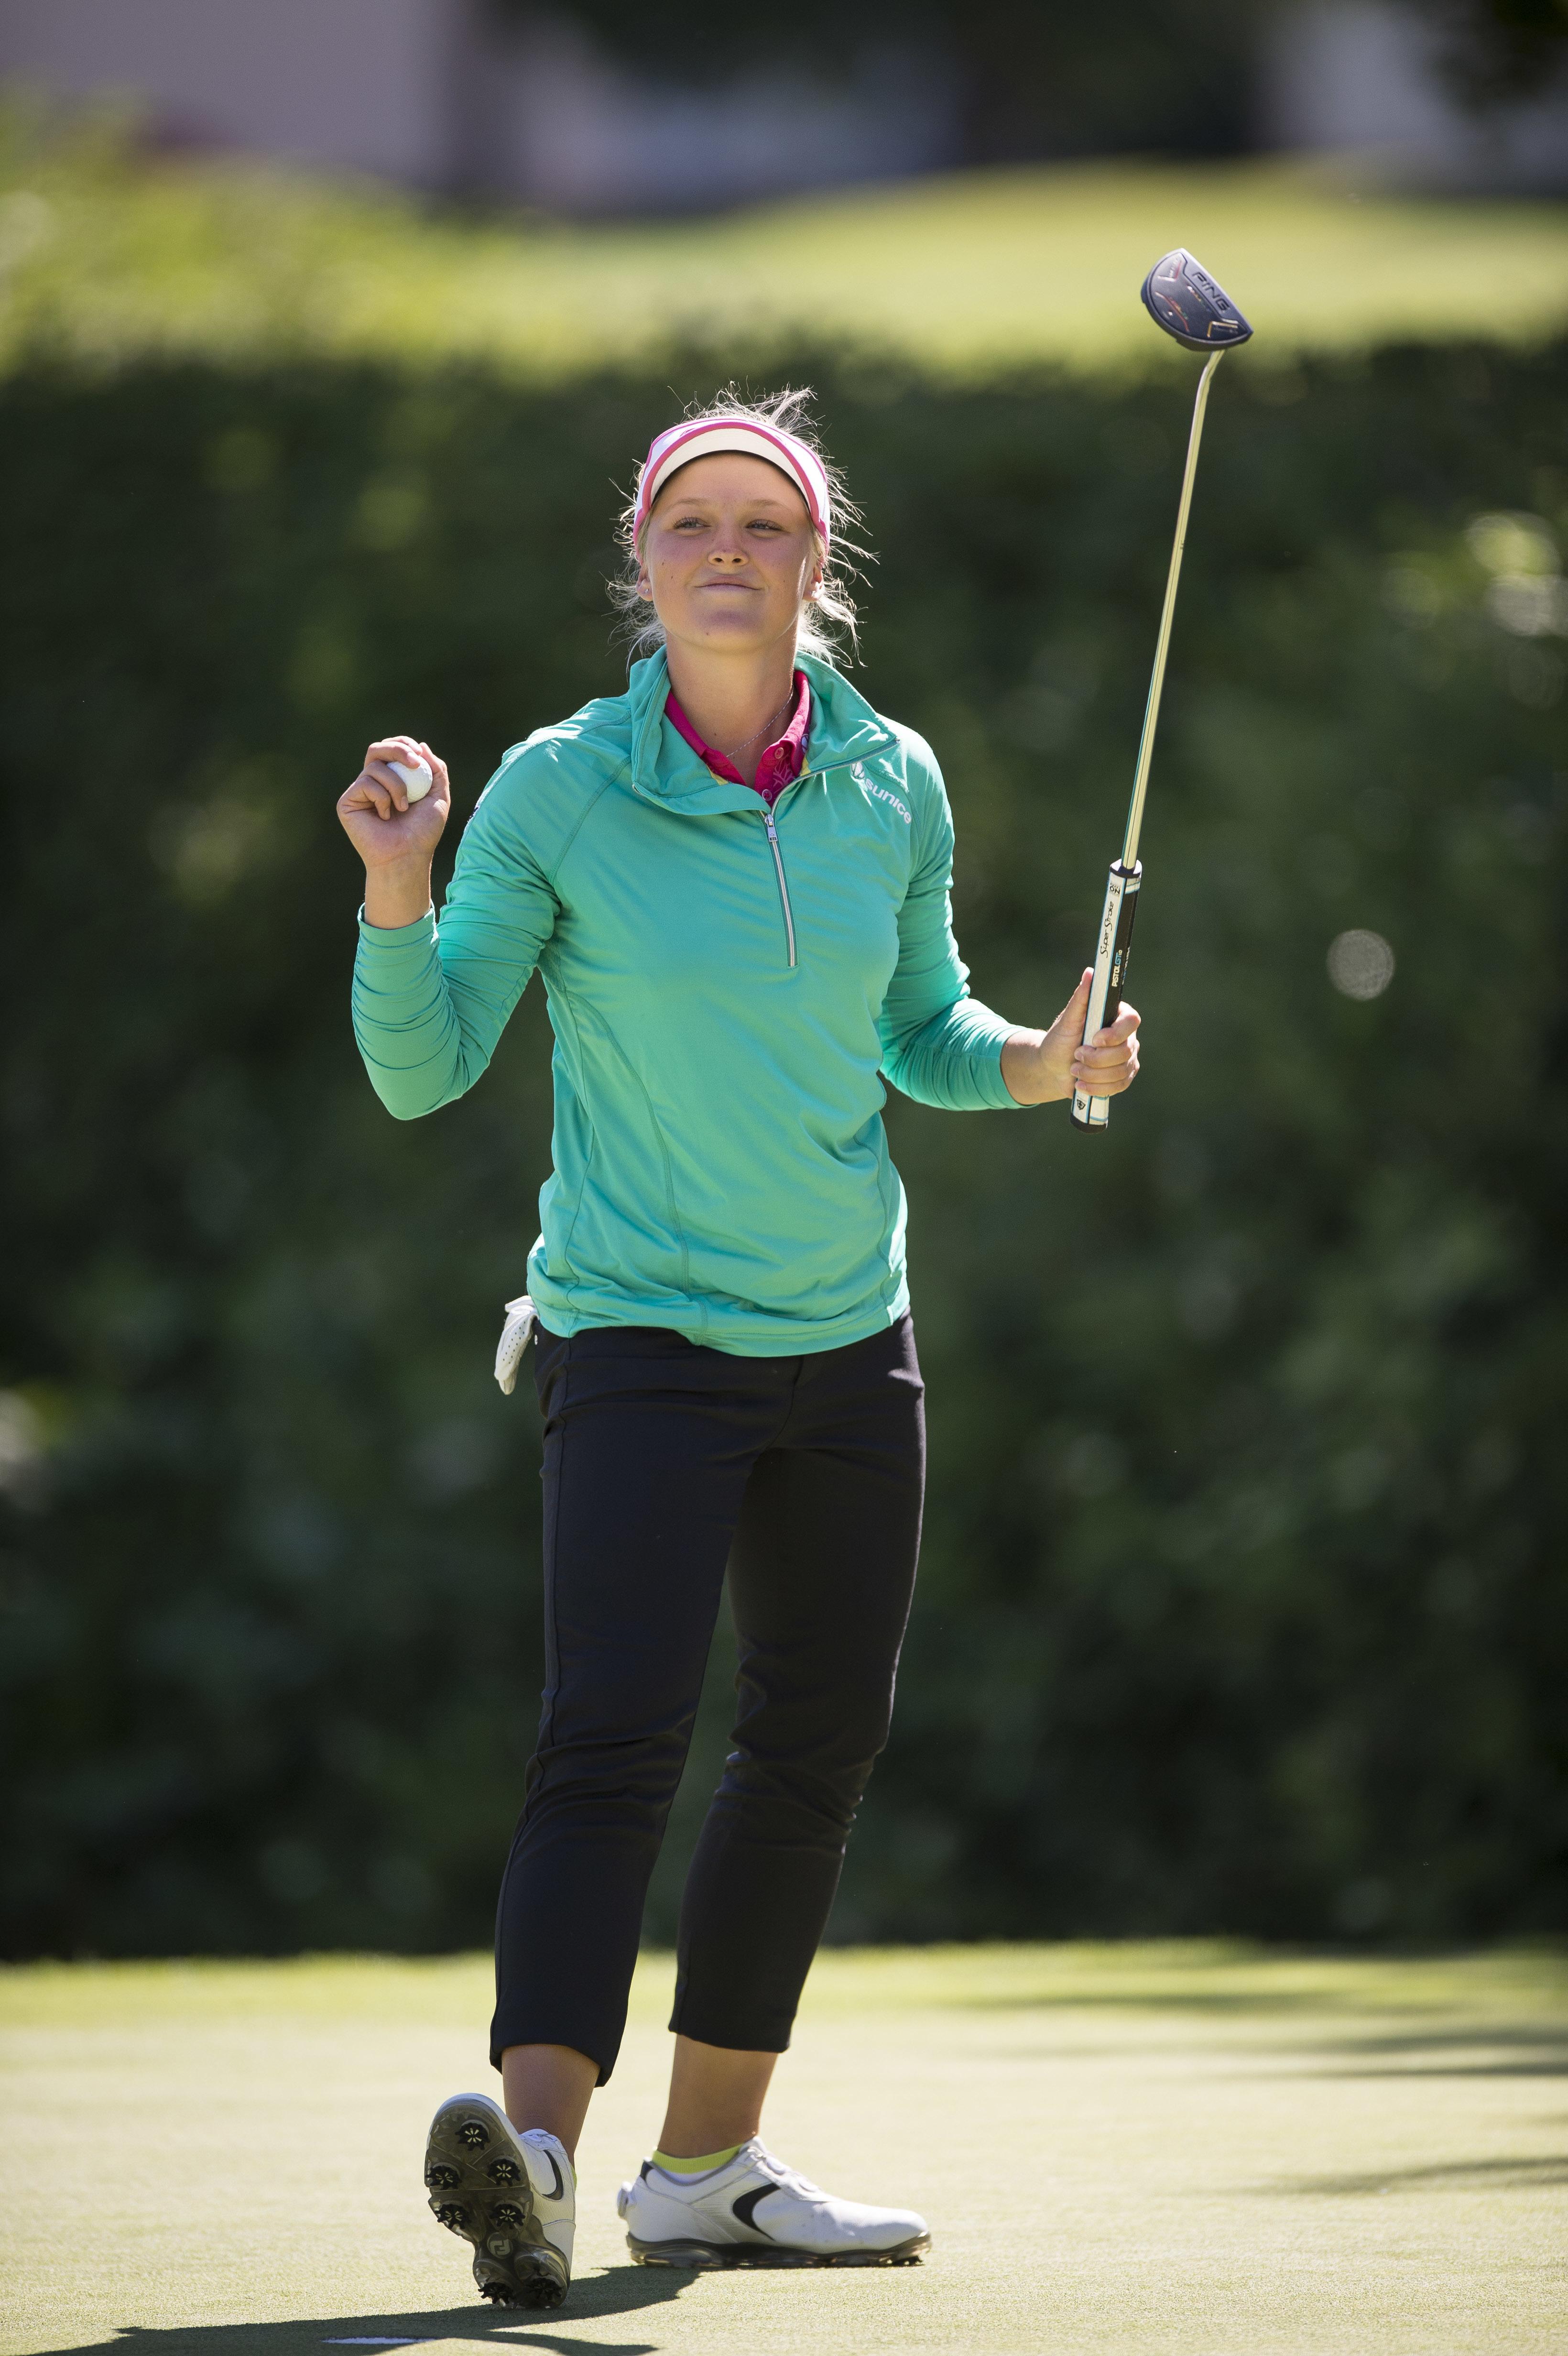 On the Fringe: Women’s golf takes center stage with U.S. Open | The ...